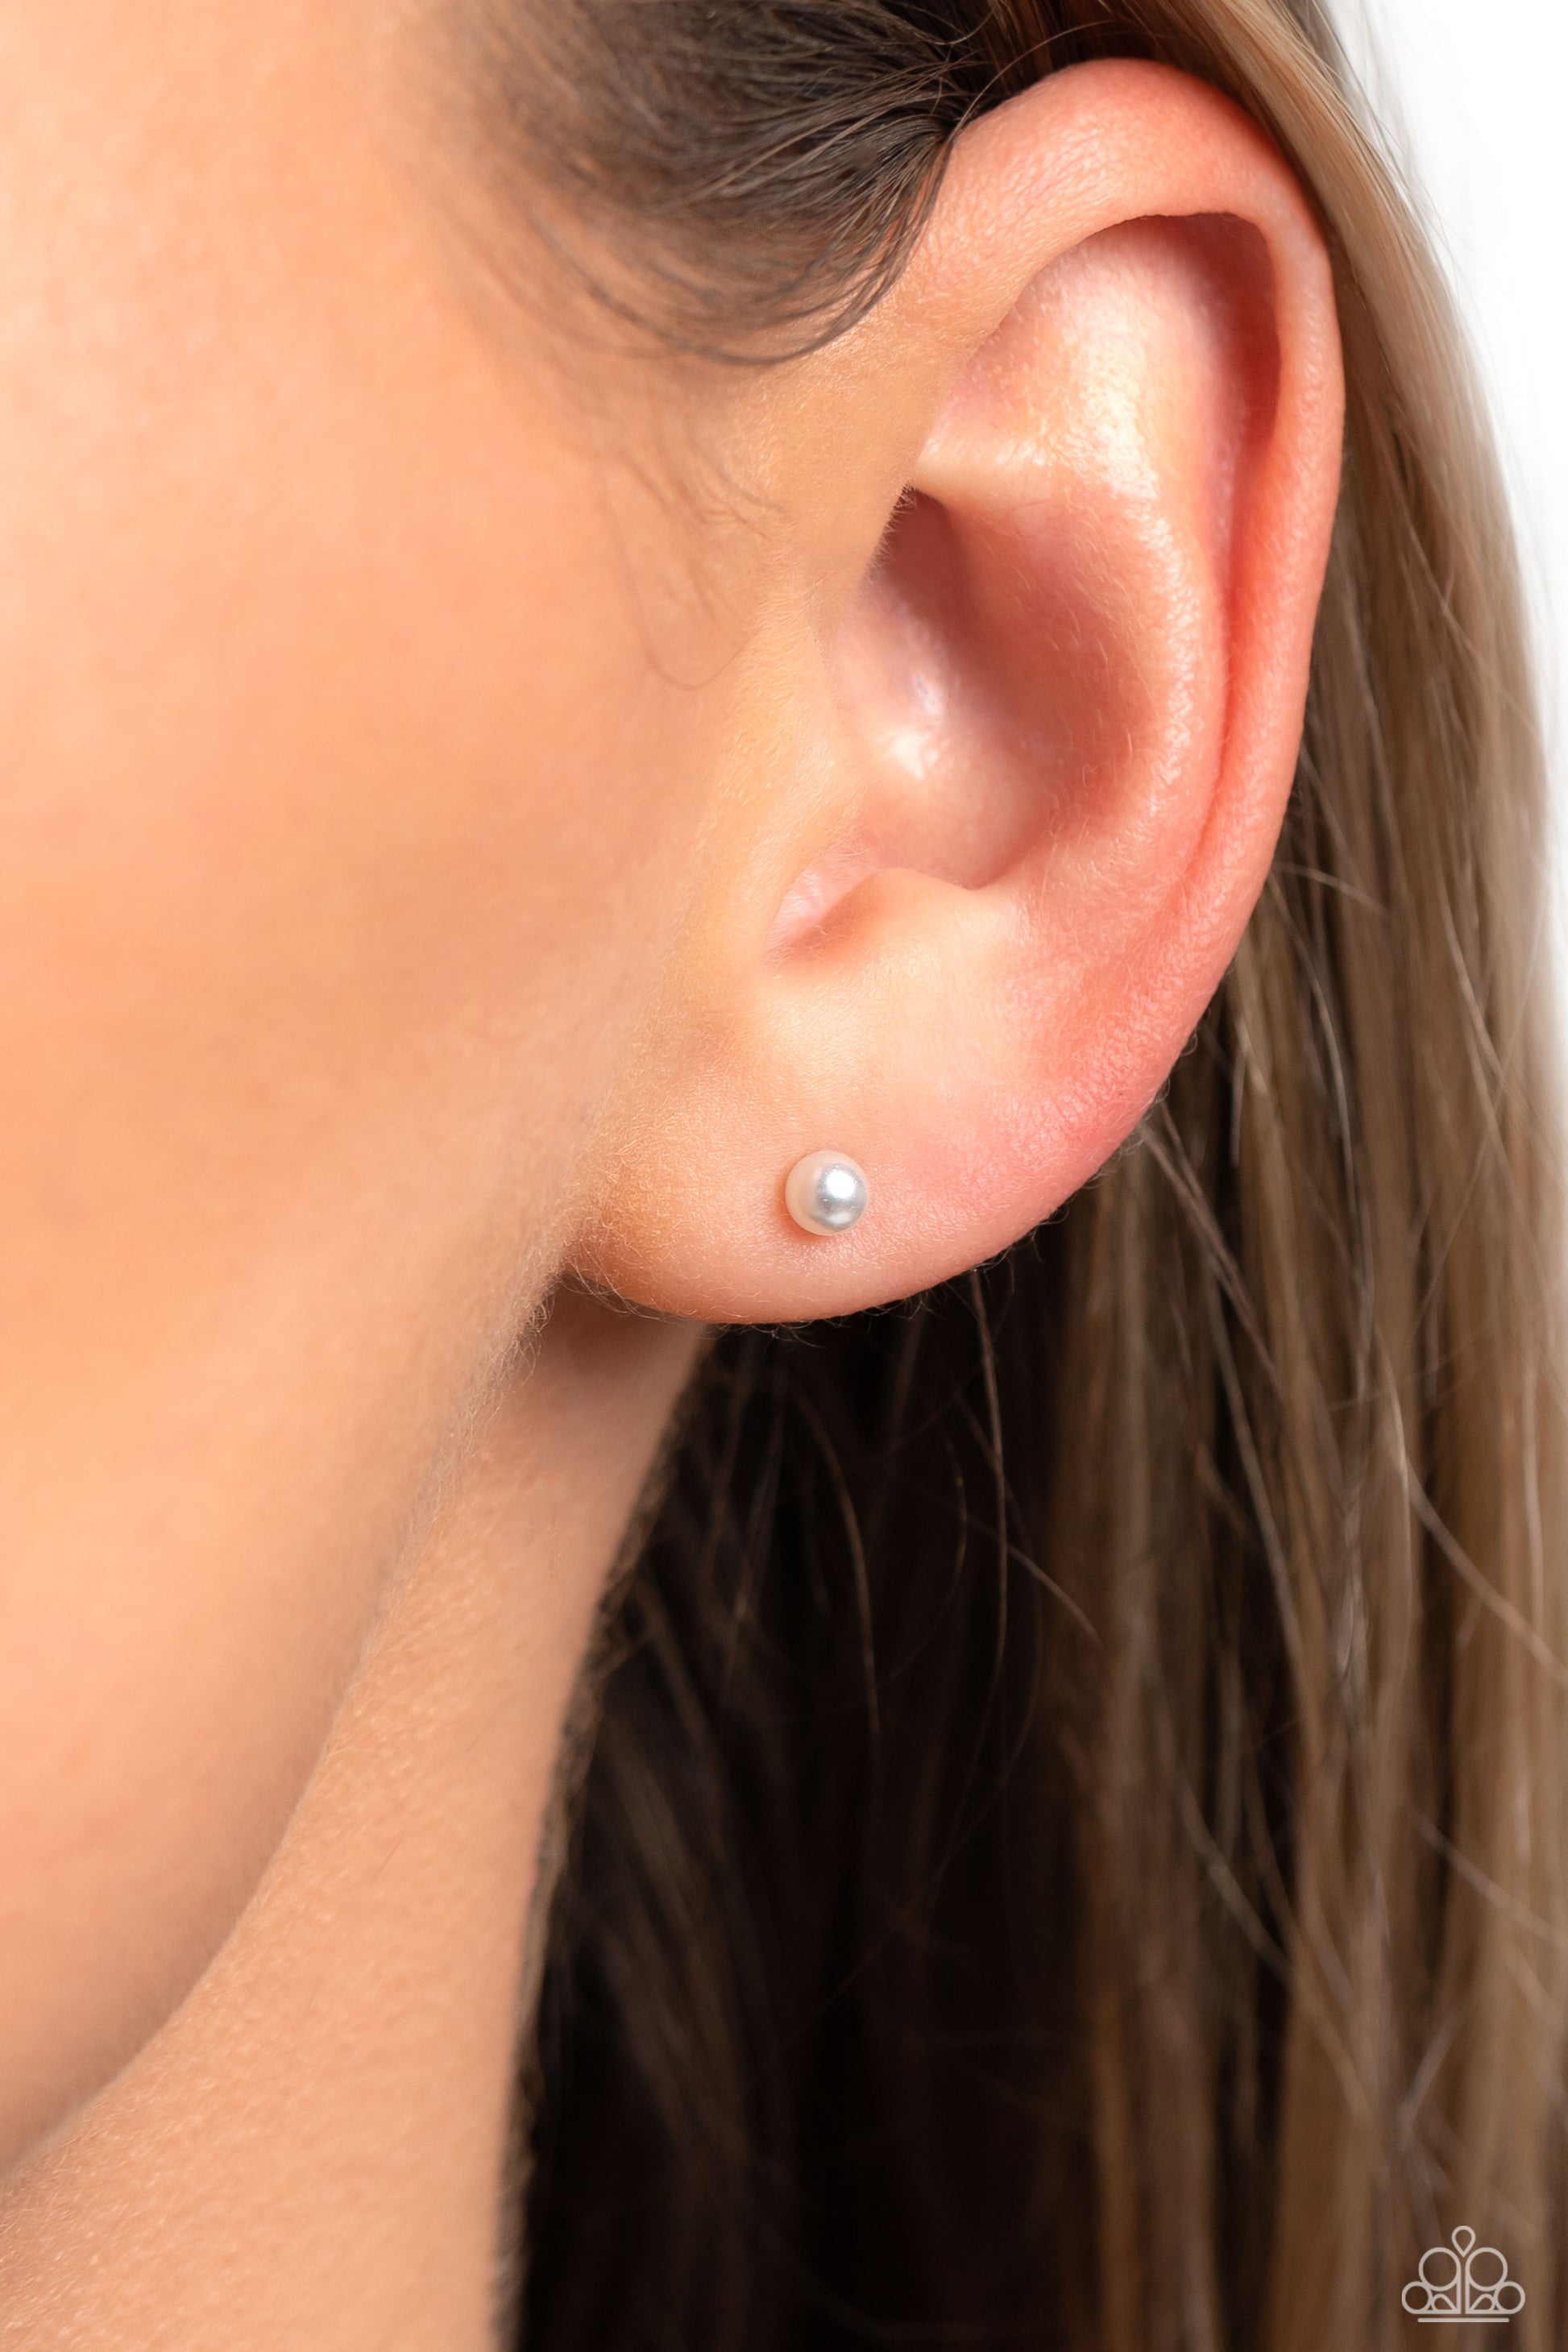 Dainty Details White Pearl Stud Earring - Paparazzi Accessories  A dainty white pearl rests against the ear for a timeless basic staple piece perfect for a vintage look. Earring attaches to a standard post fitting.  Sold as one pair of post earrings.  P5PO-WTXX-369XX